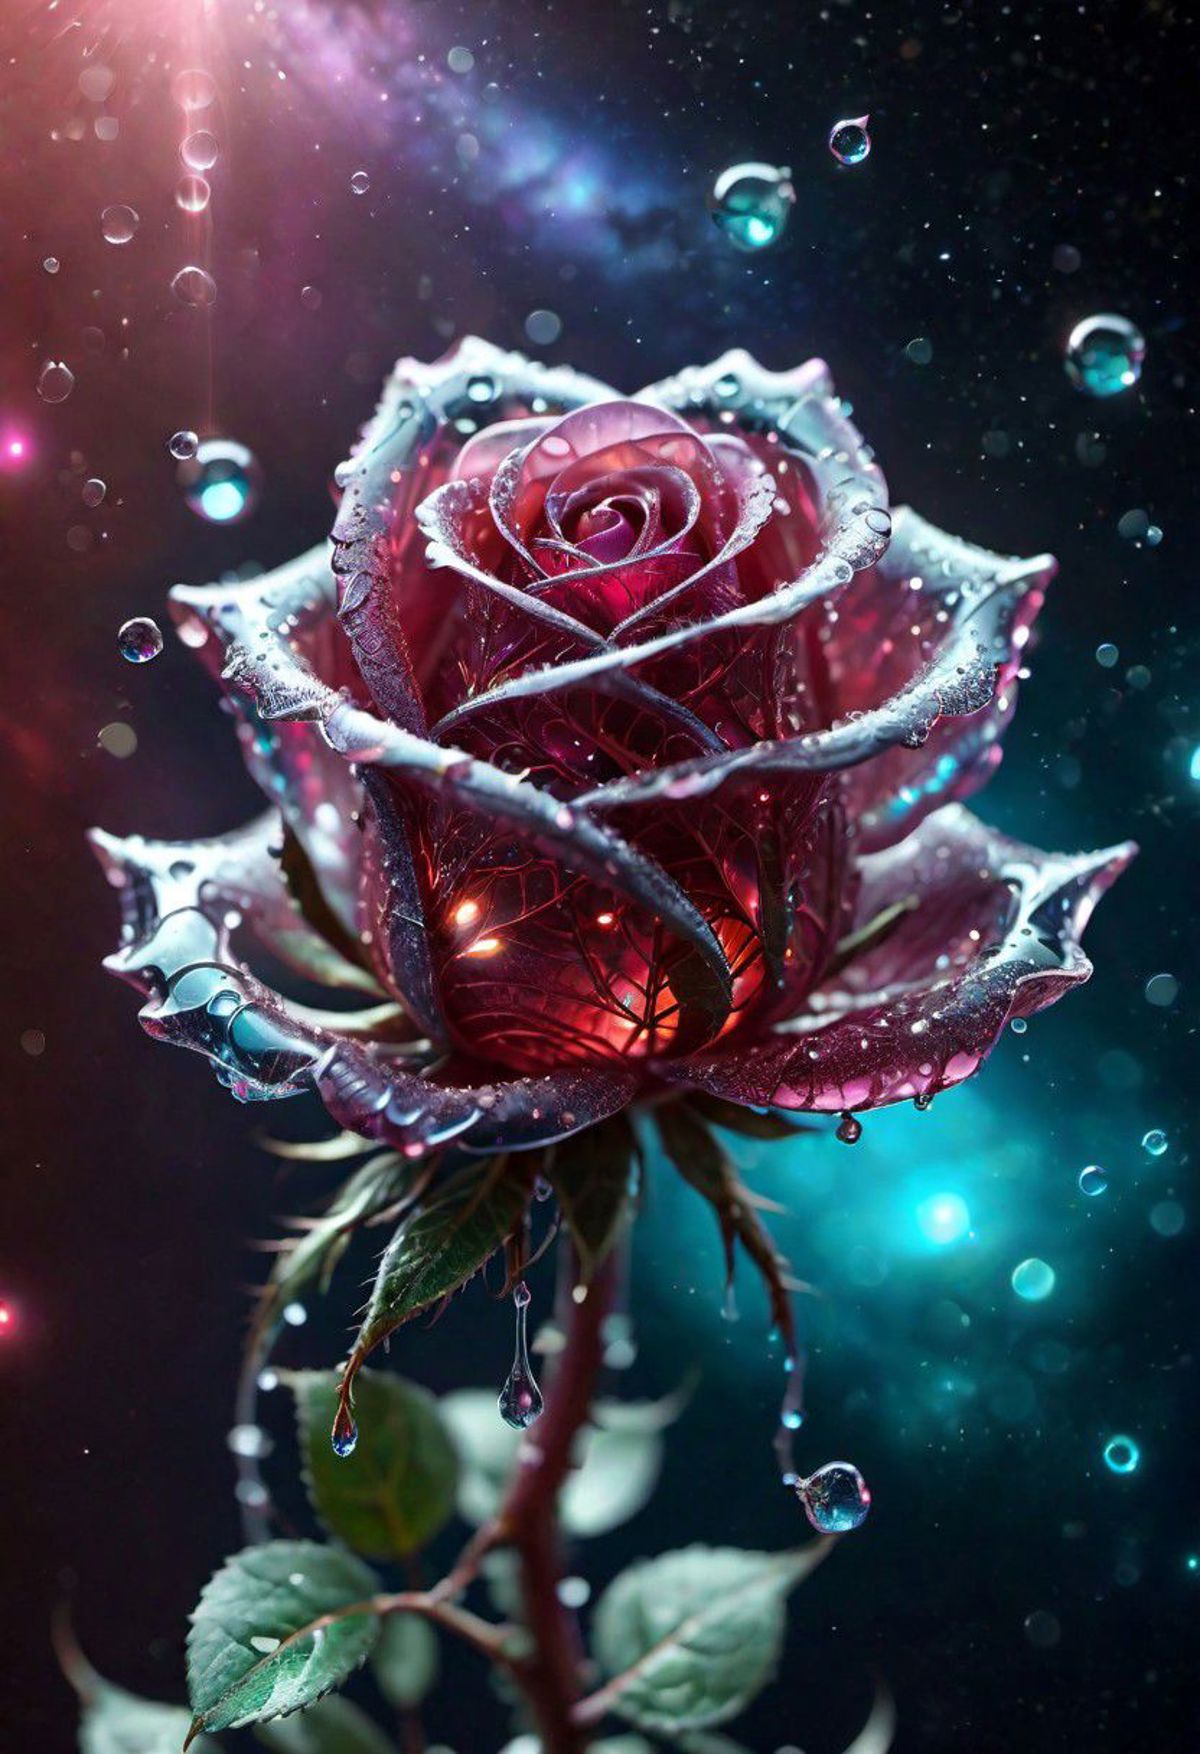 A Pink Rose with Purple and Blue Leaves in a Rainy Night Scene